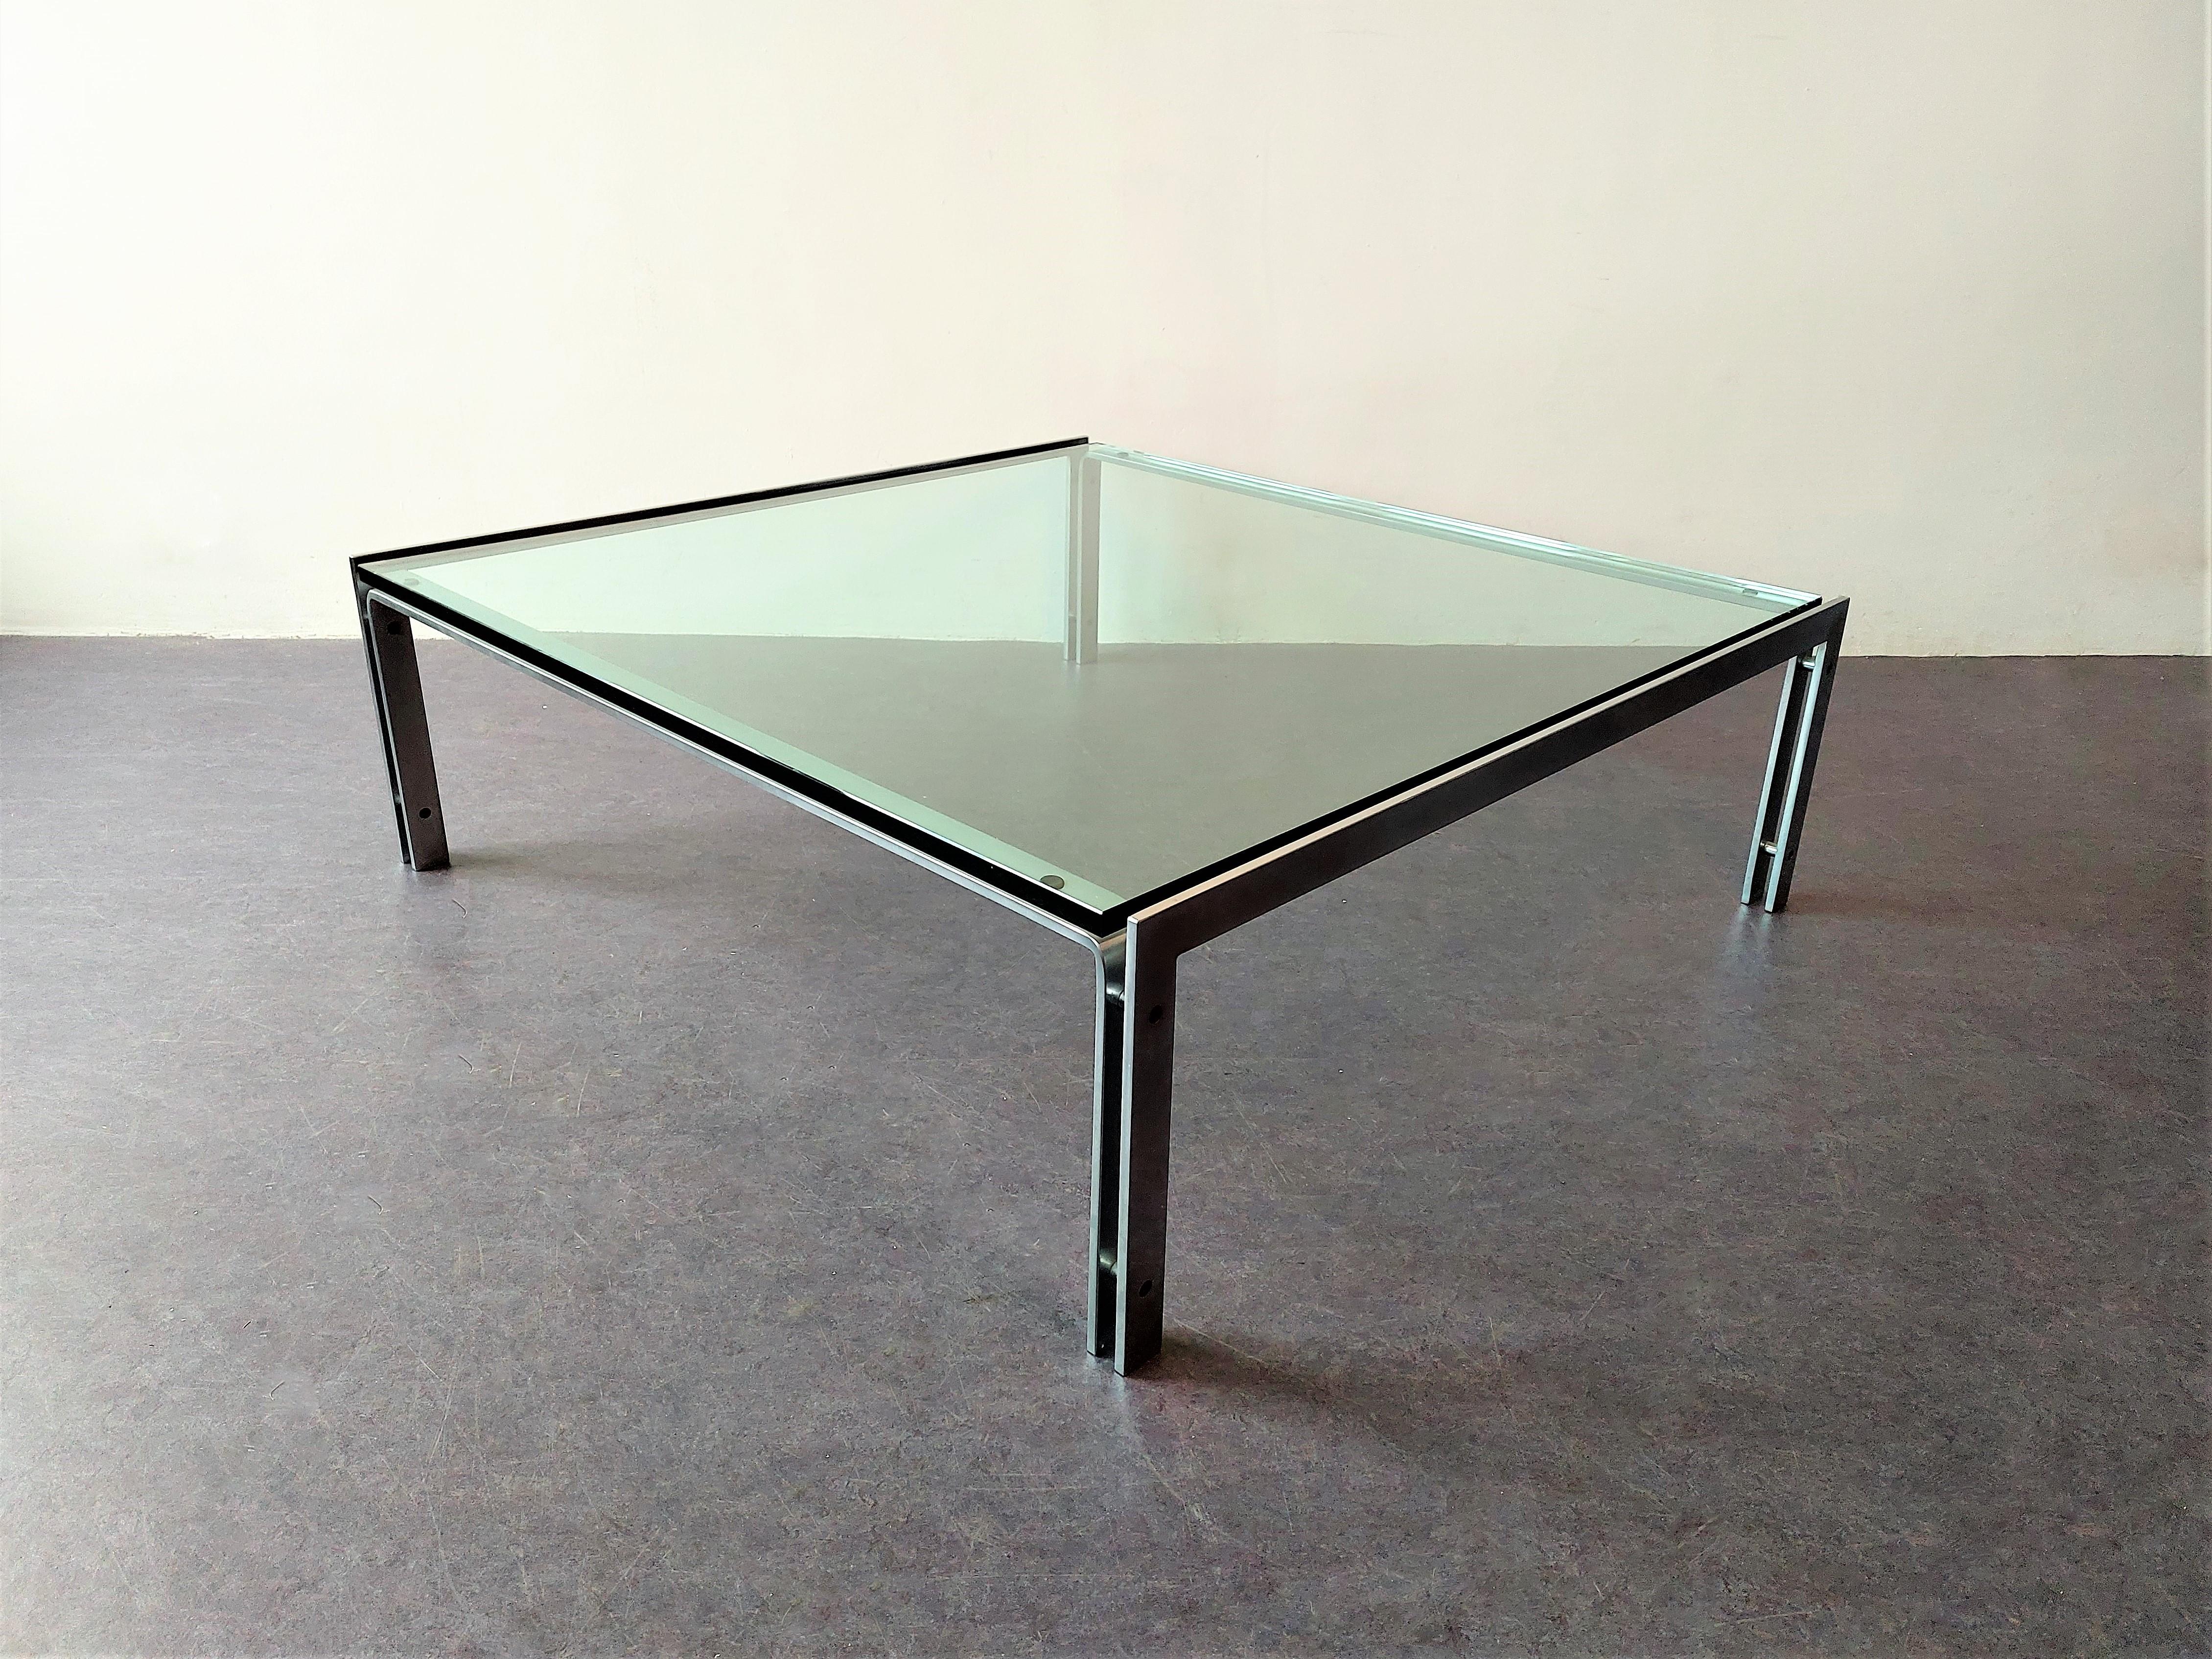 This M1 coffee table was designed by Hank Kwint for Metaform in the early 1980's. It is made out of a steel frame that supports a two cm thick and heavy glass top. A very nice and minimalistic shaped coffee table will look fantastic in any modern